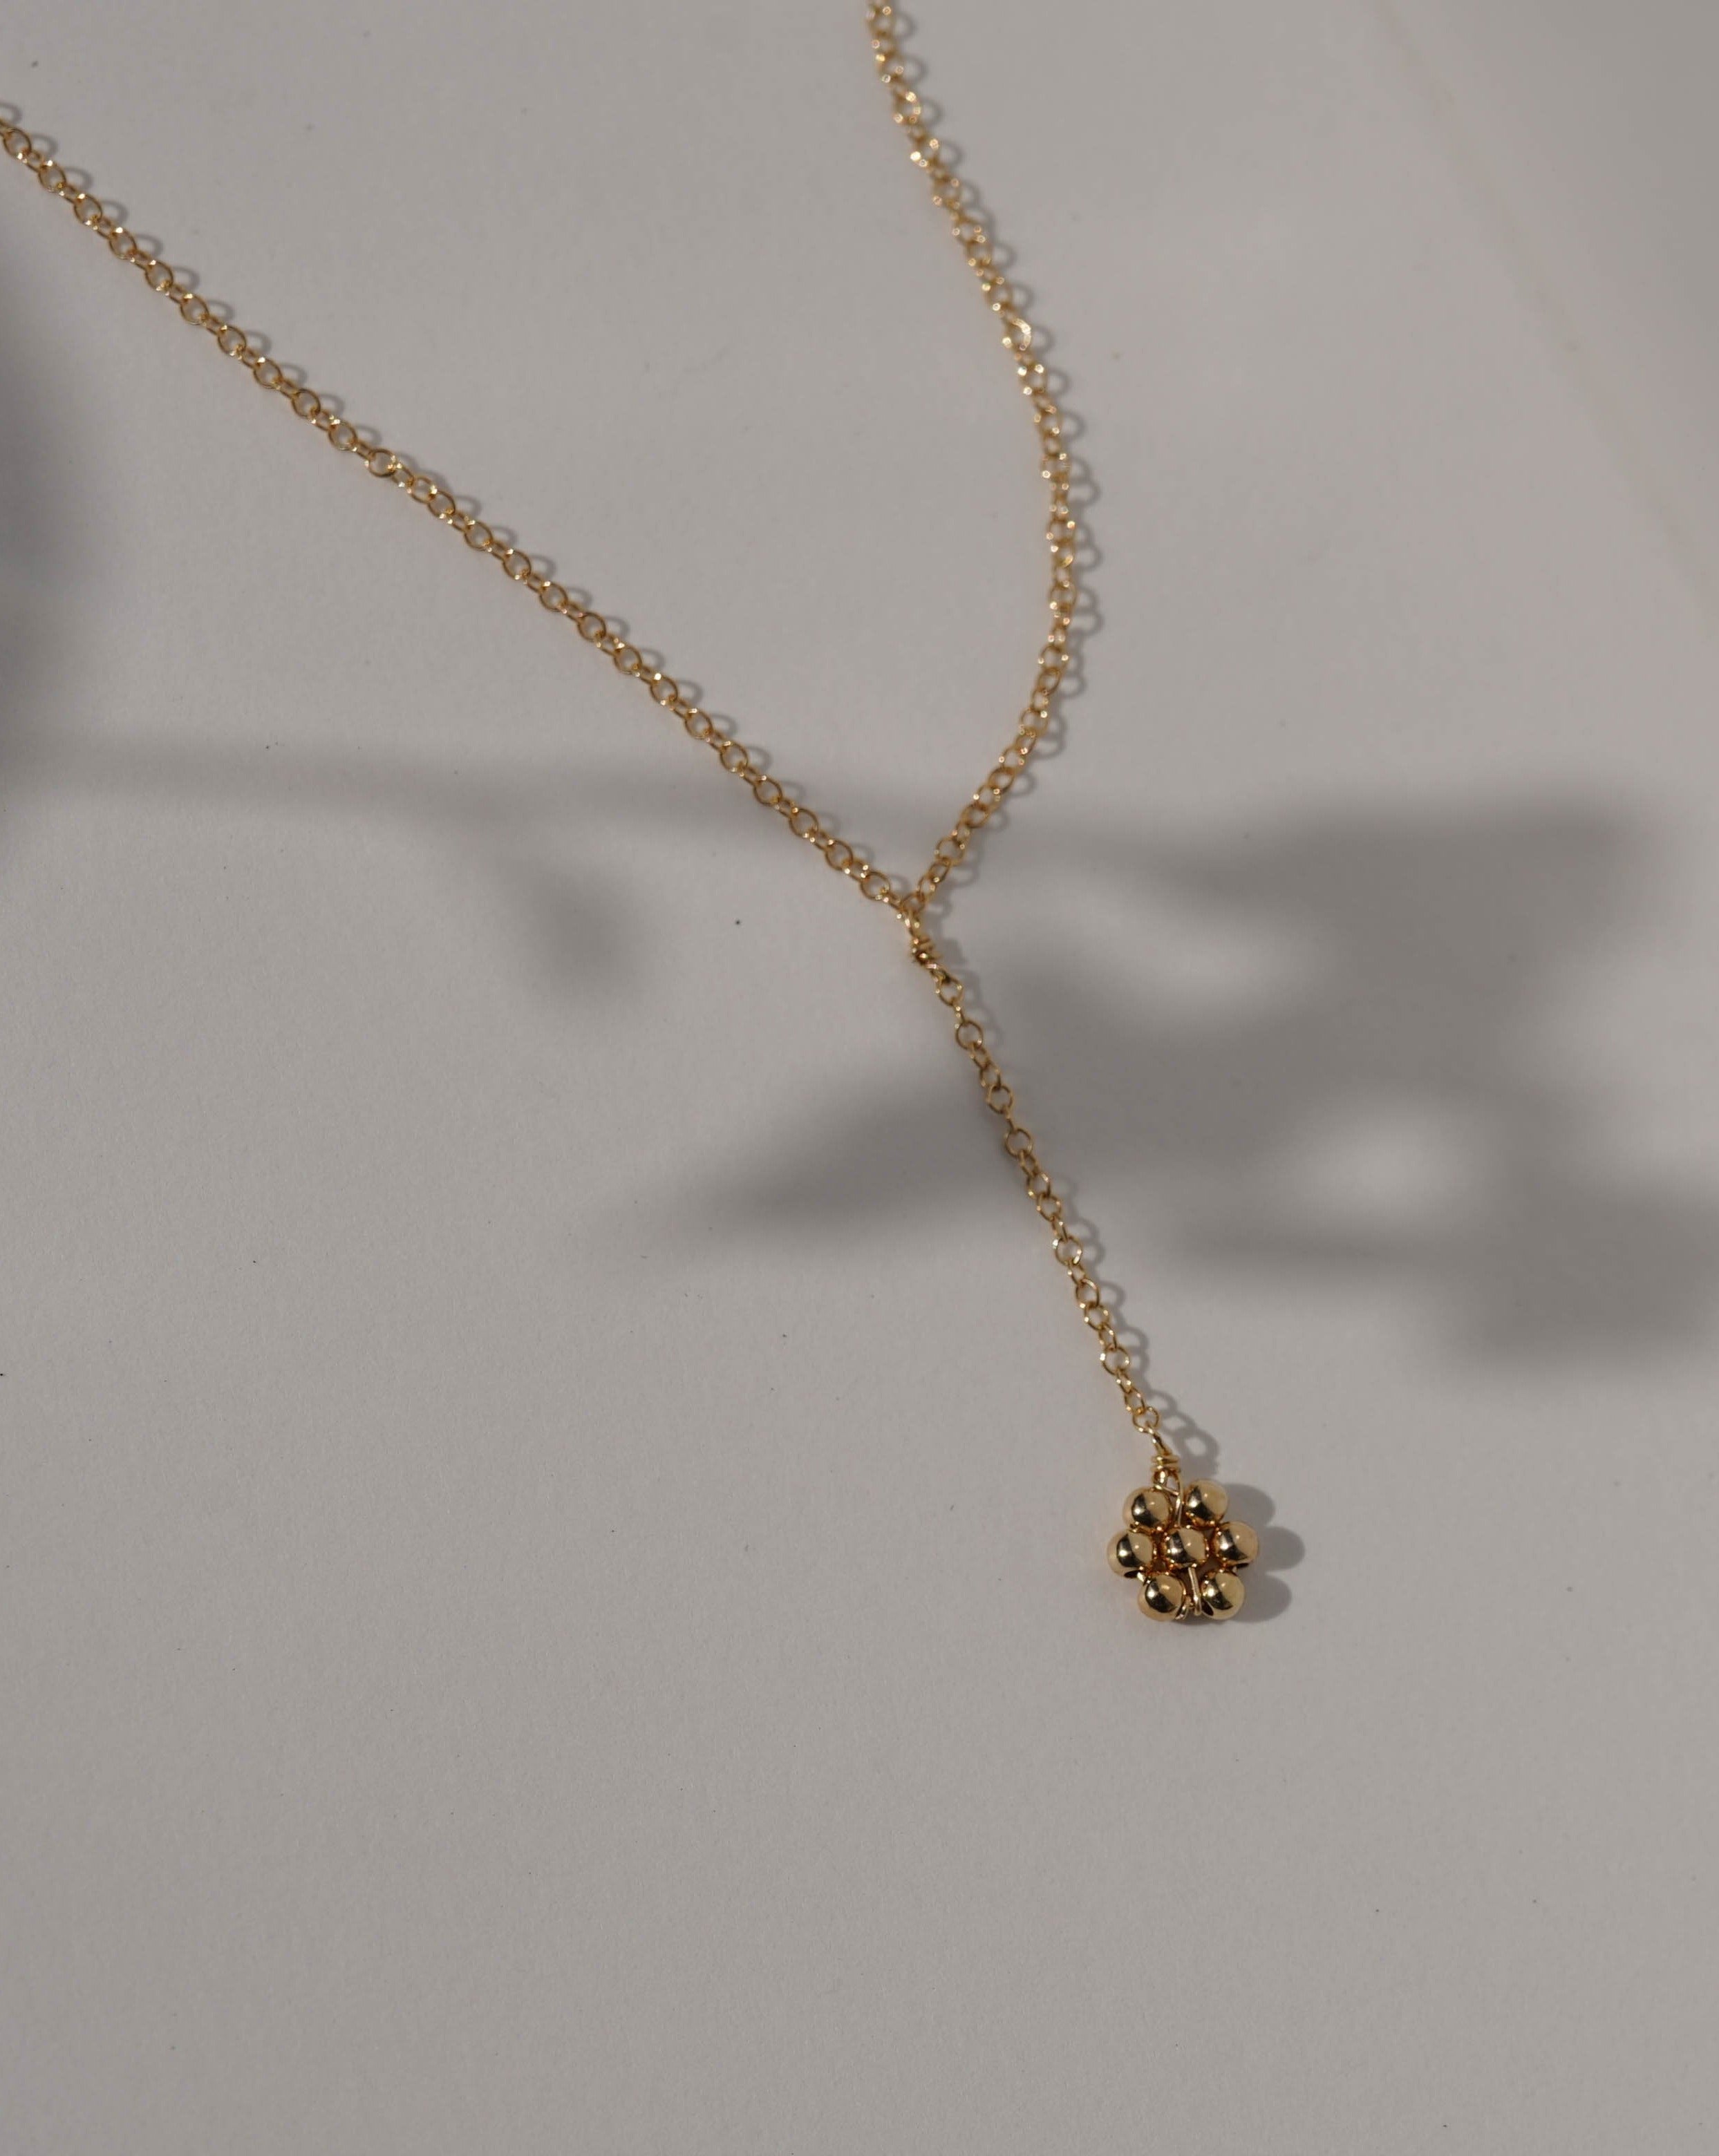 Paloma Necklace by KOZAKH. A 16 to 18 inch adjustable length, 3 inch drop lariat style necklace, crafted in 14K Gold Filled, featuring a handmade beaded daisy charm.